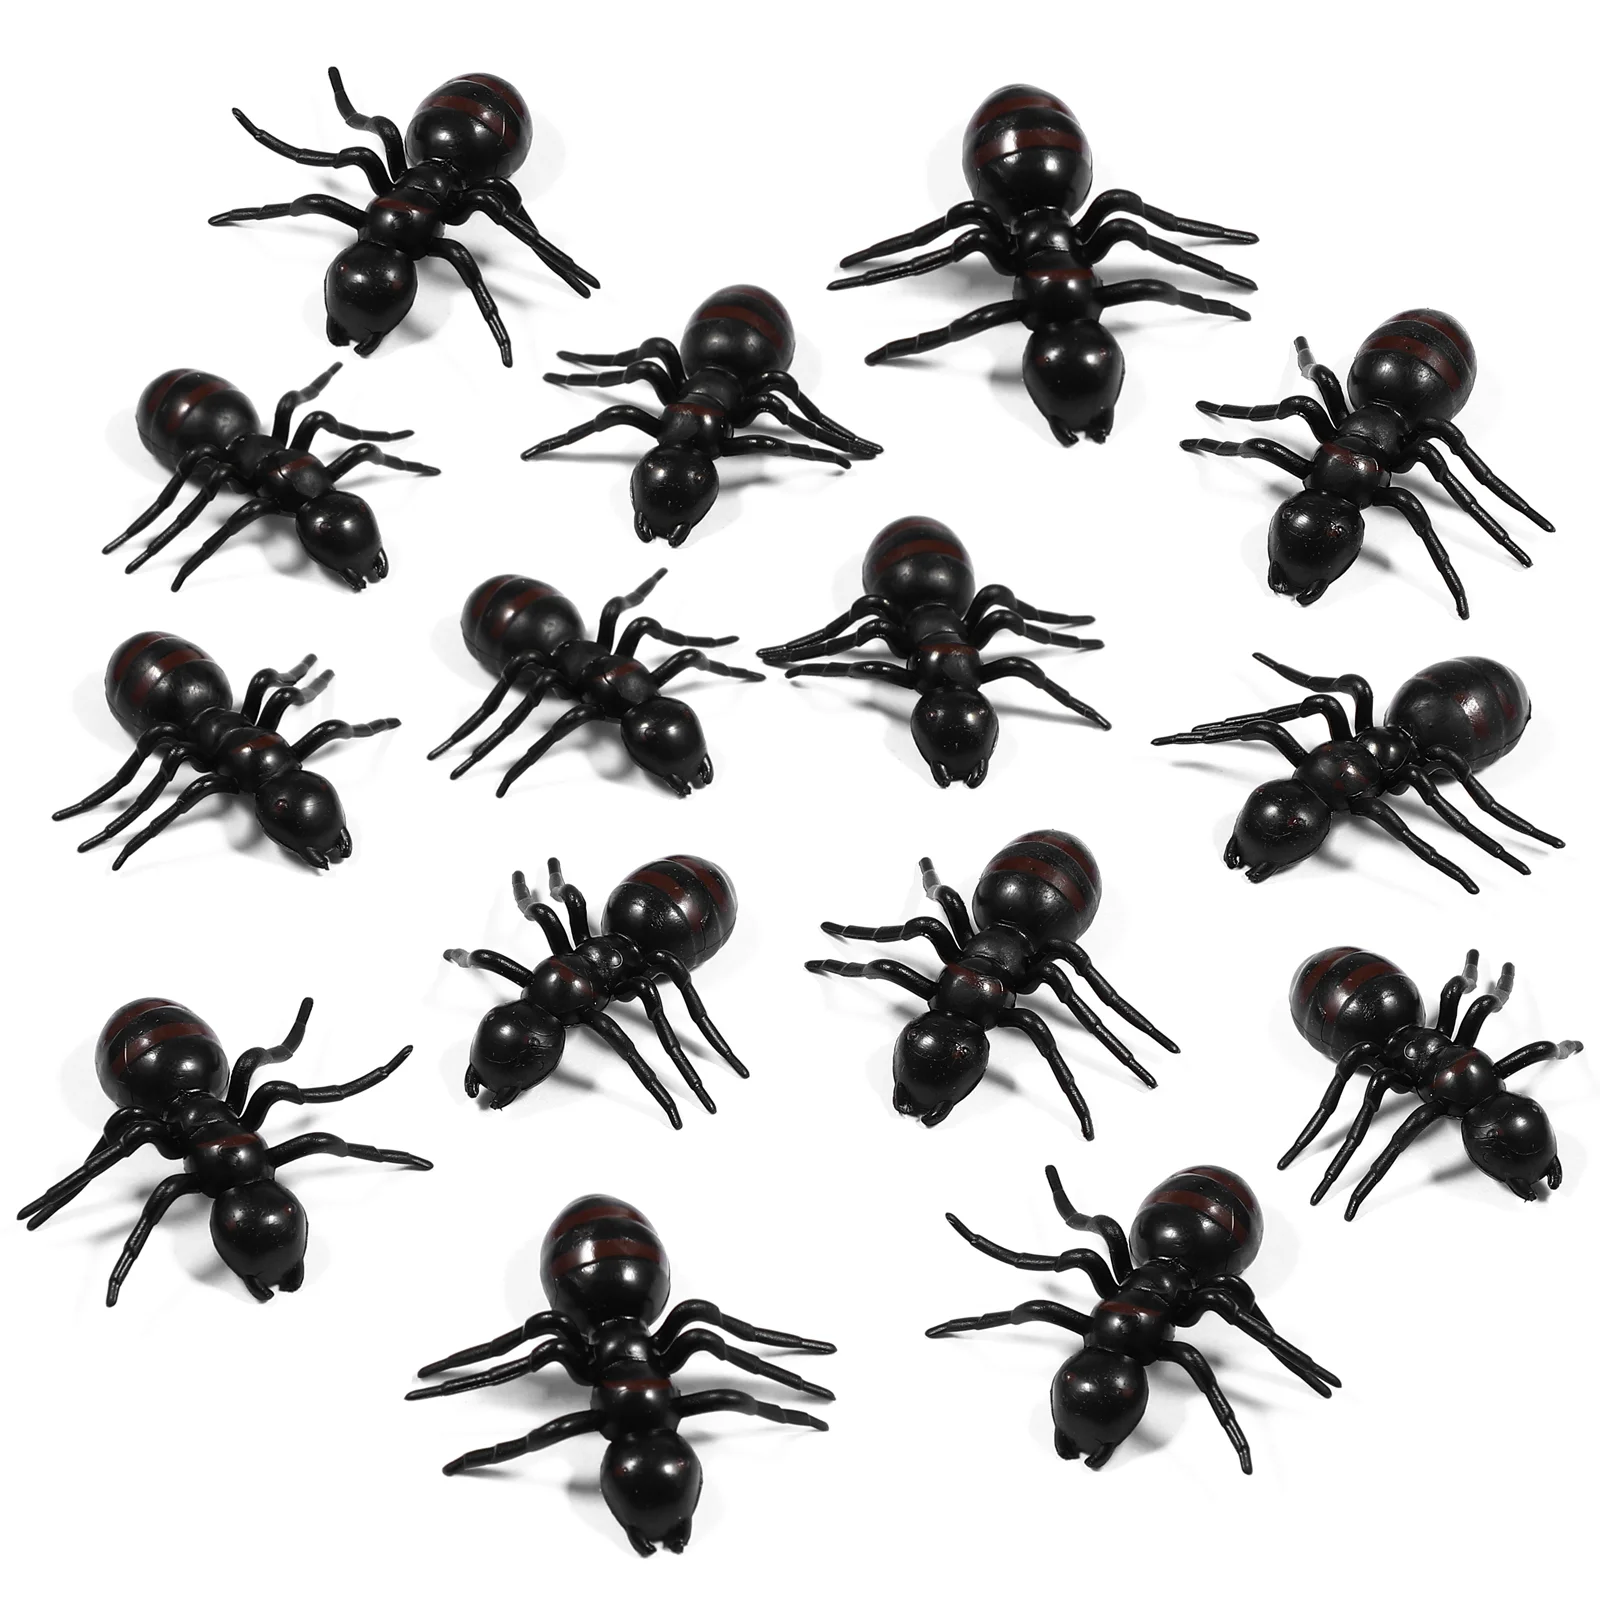 

Simulation Ants Plastic Fake Big Ant Animal Insect Model Halloween April Fool'S Day Pranks Joking Toys Children Gifts